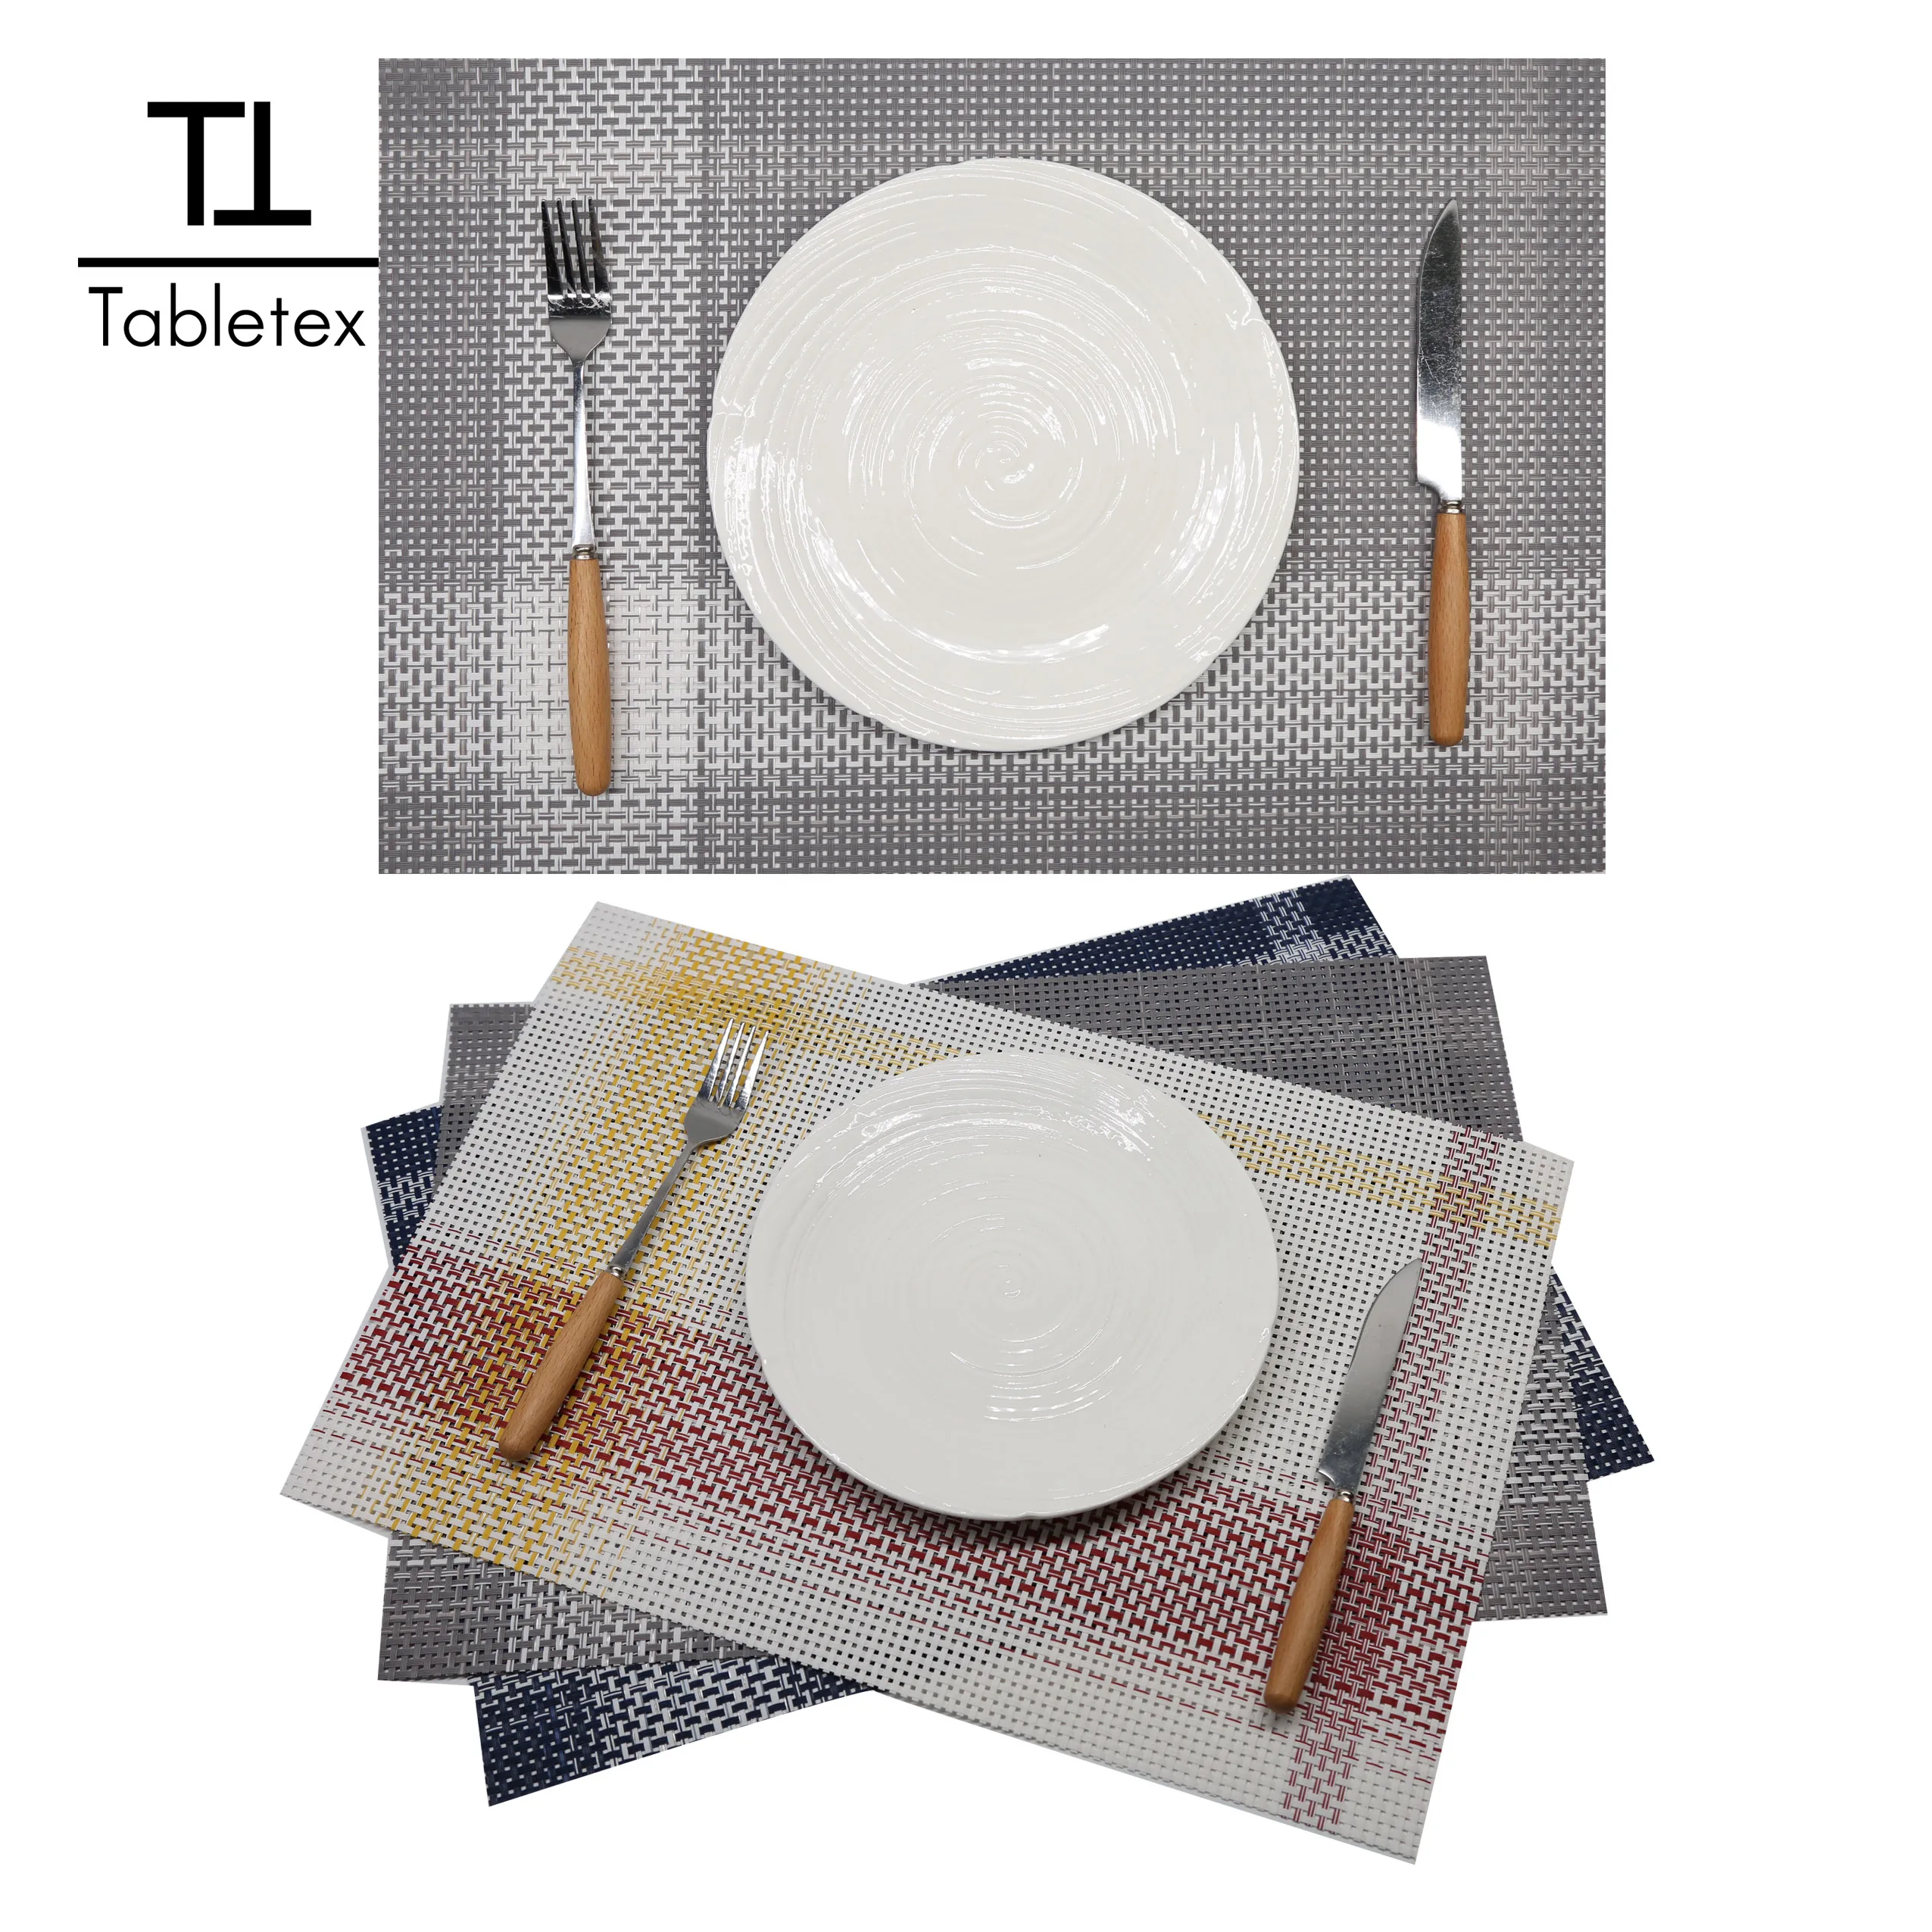 

Tabletex Dining Table Washable Woven Vinyl Placemat Non-Slip Heat Resistant Kitchen Table Mats Easy to Clean, Could be any color